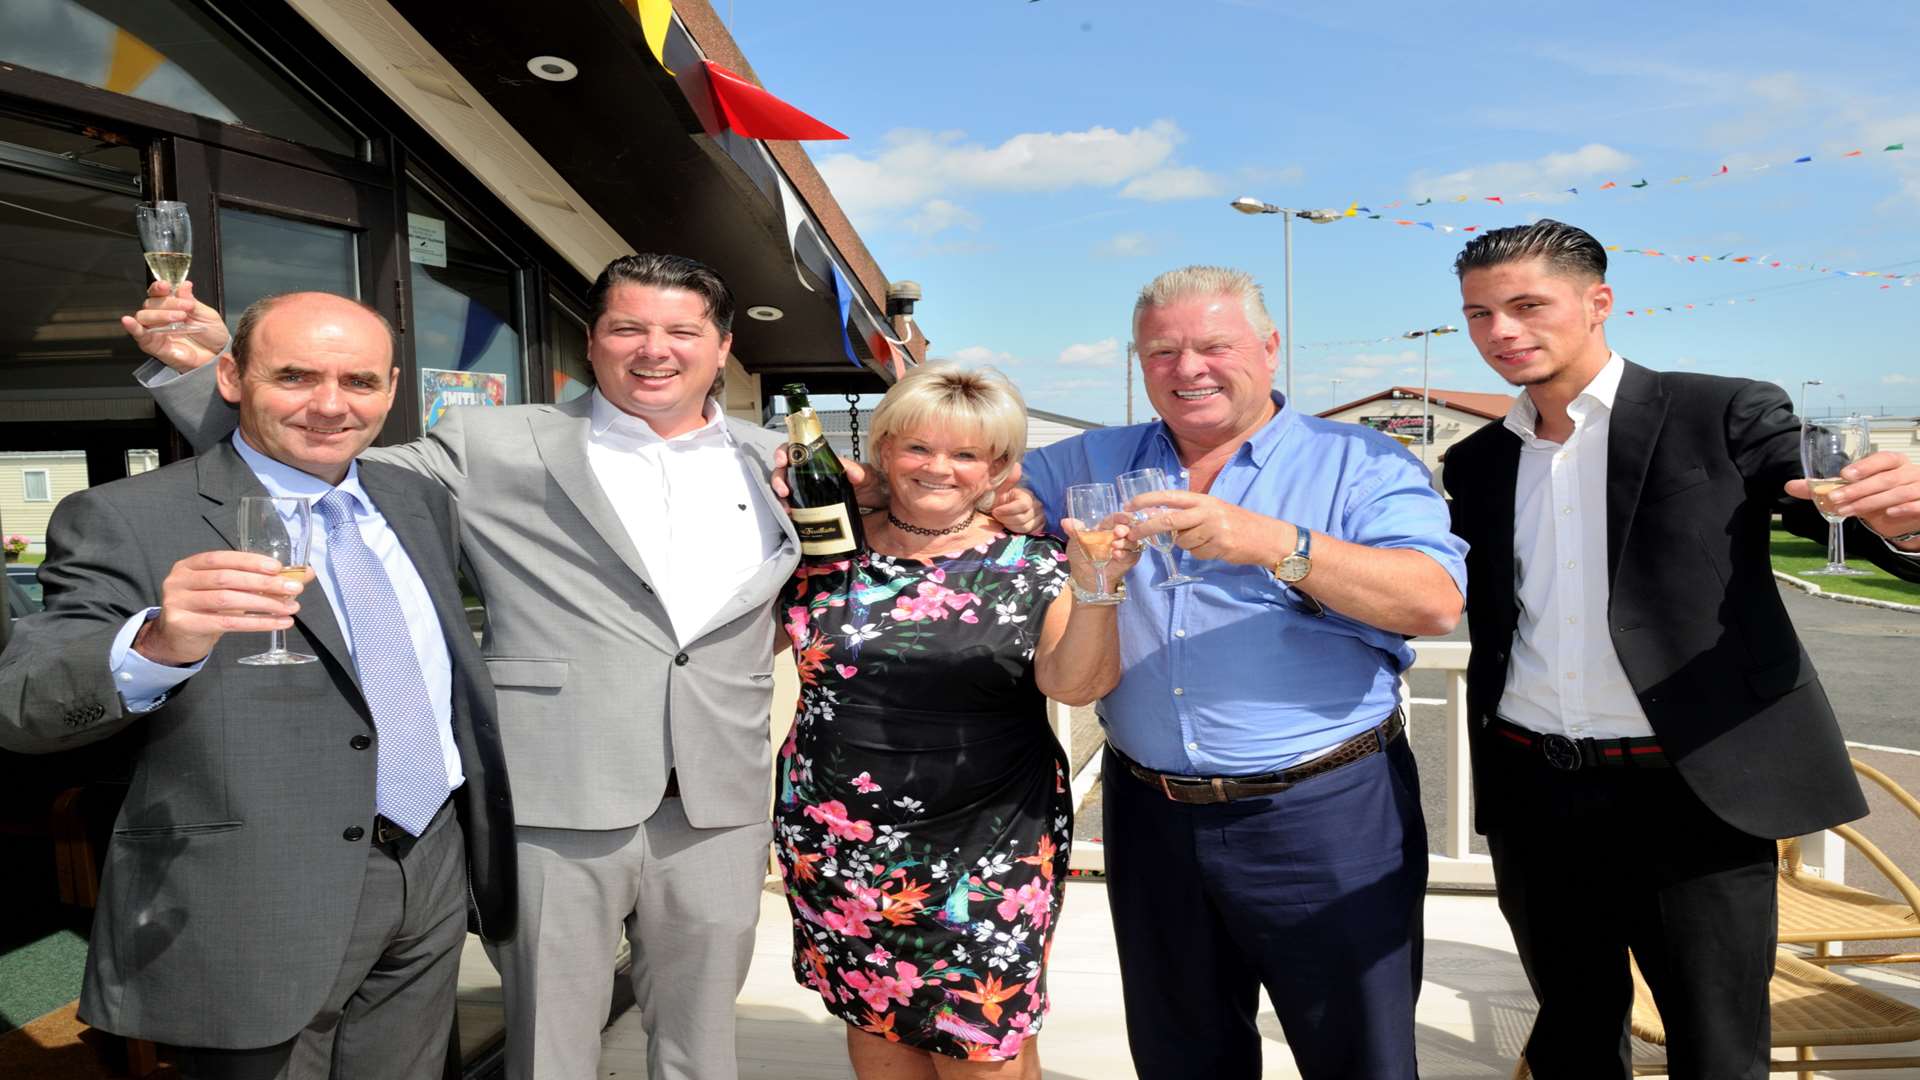 Cheers: From the left, operations manager Andy Johnston with director Paddy Cosgrove, retiring Maureen Wharton, Patrick Cosgrove and Paddy Cosgrove Jnr.